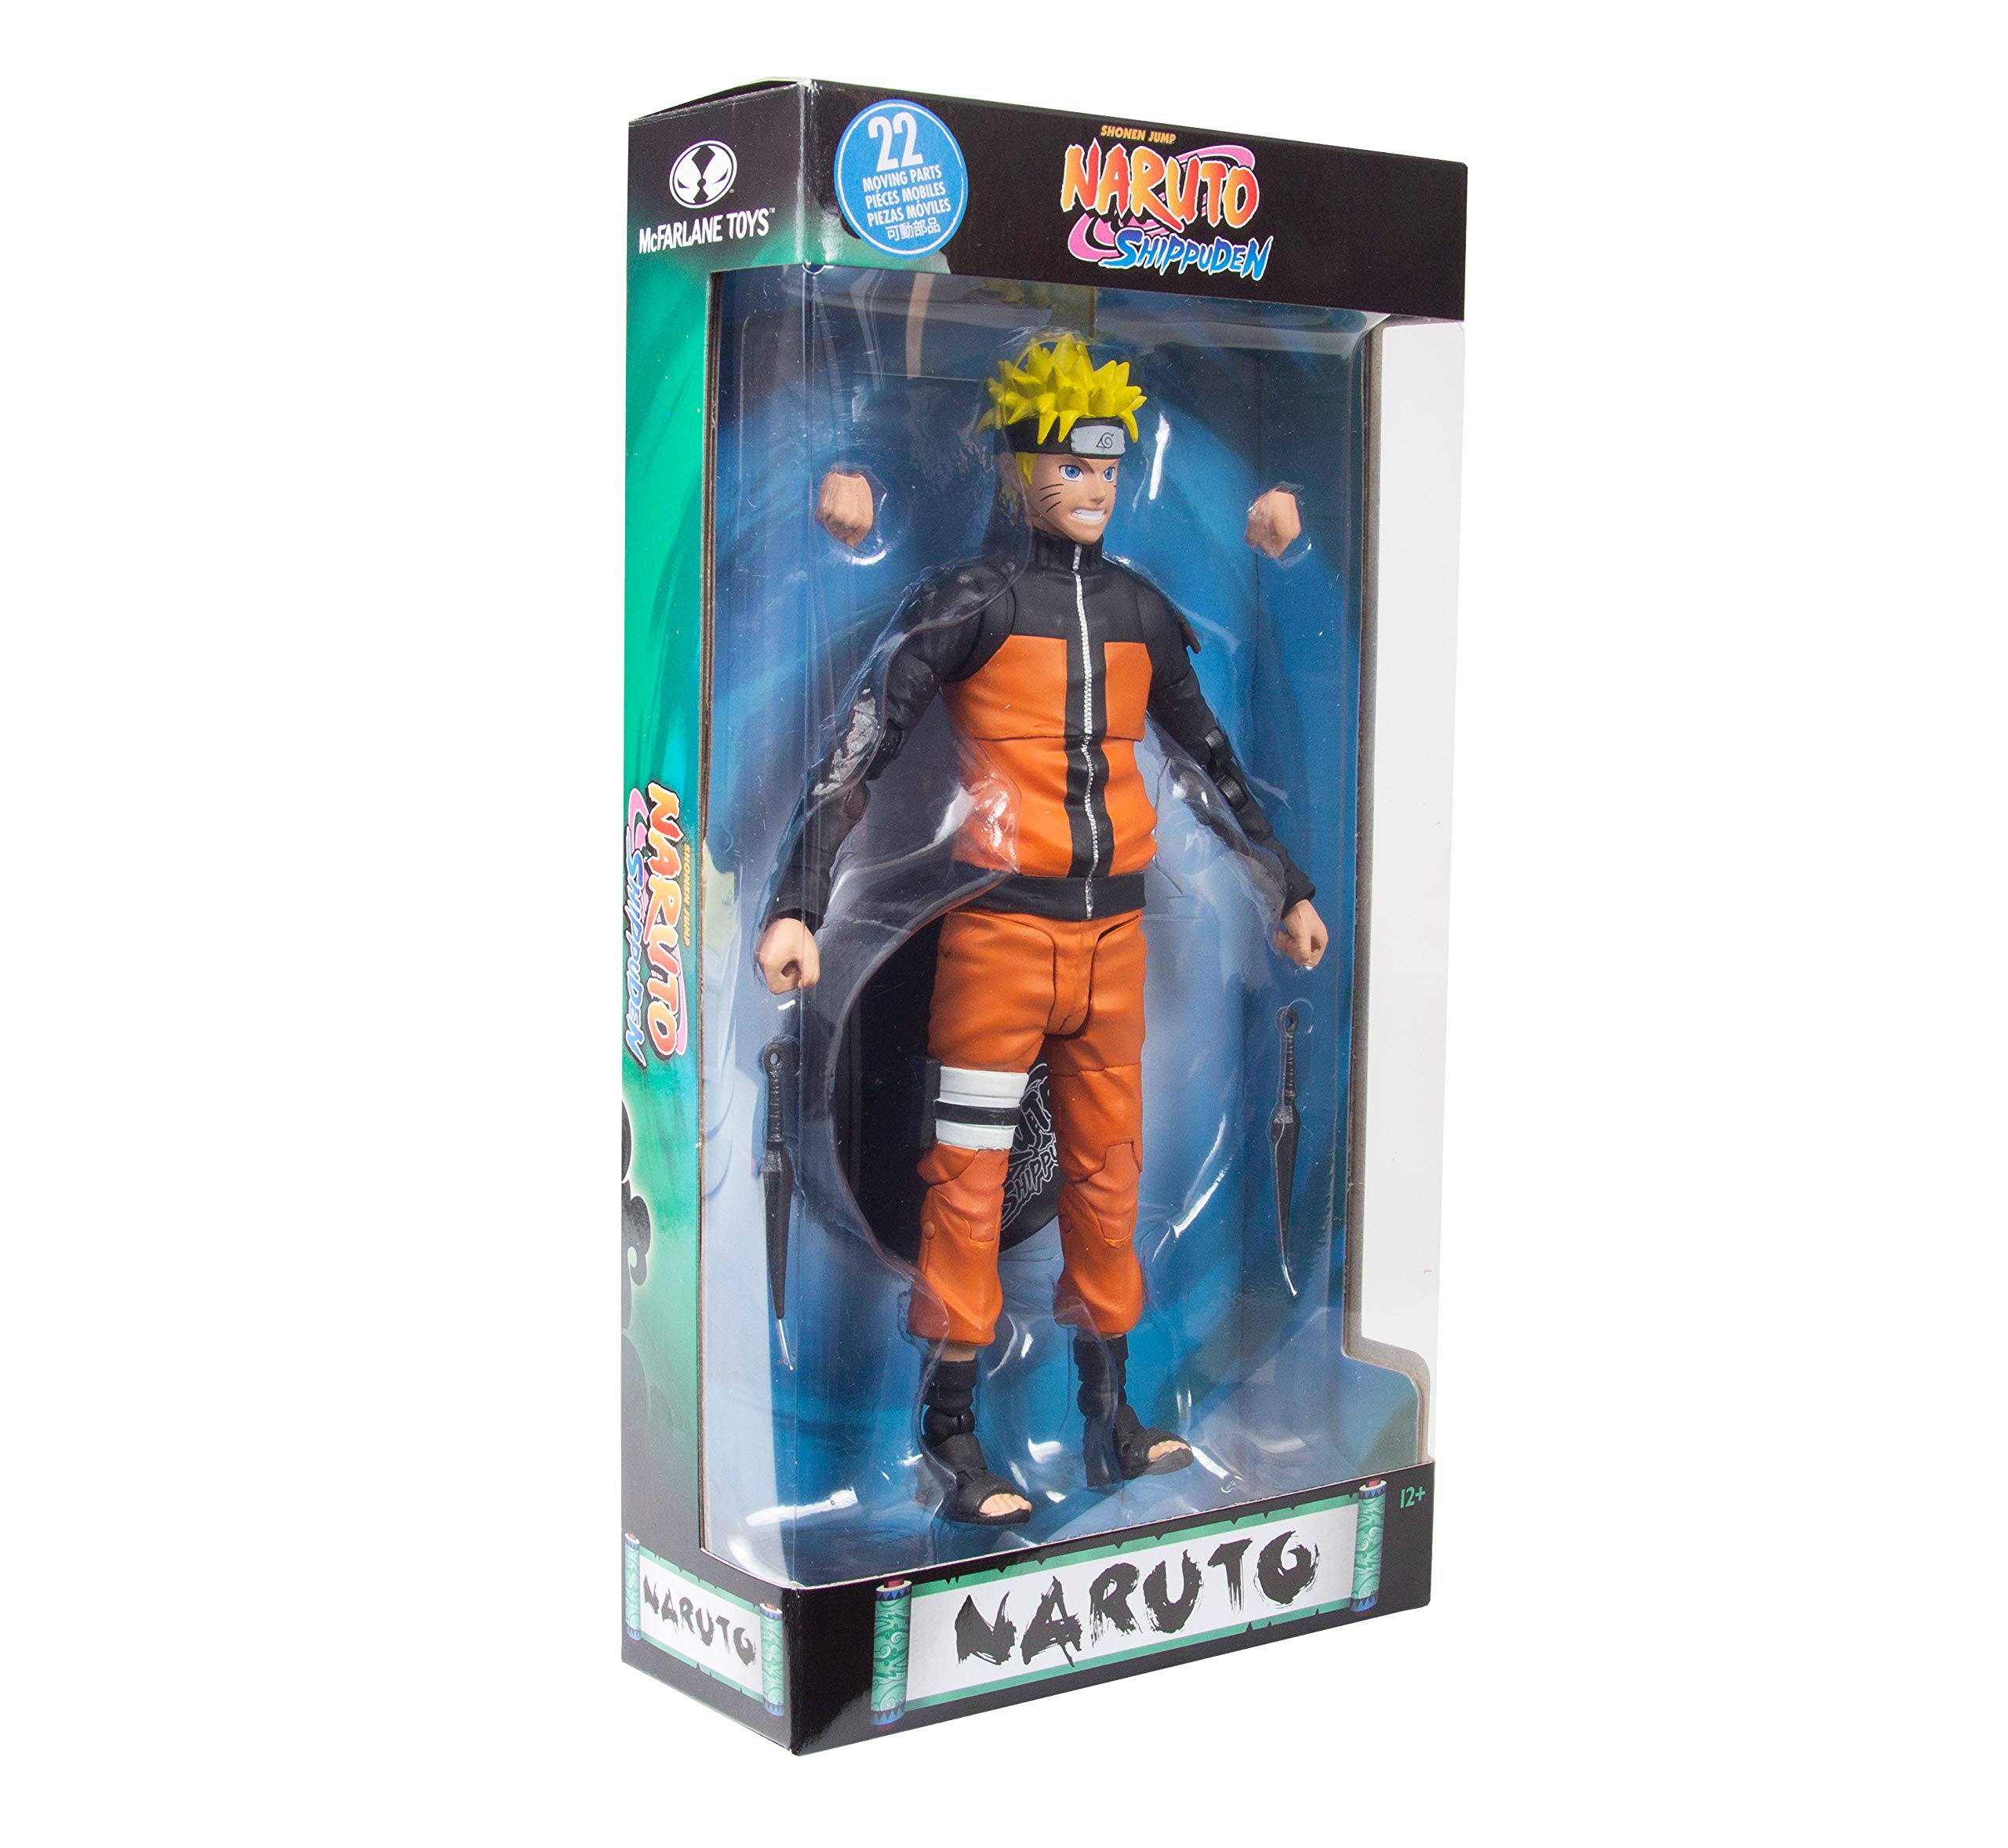 Pin by Laurent Maes on Resine kit ❤ & statuette | Anime figures, Action figure  naruto, Anime figurines